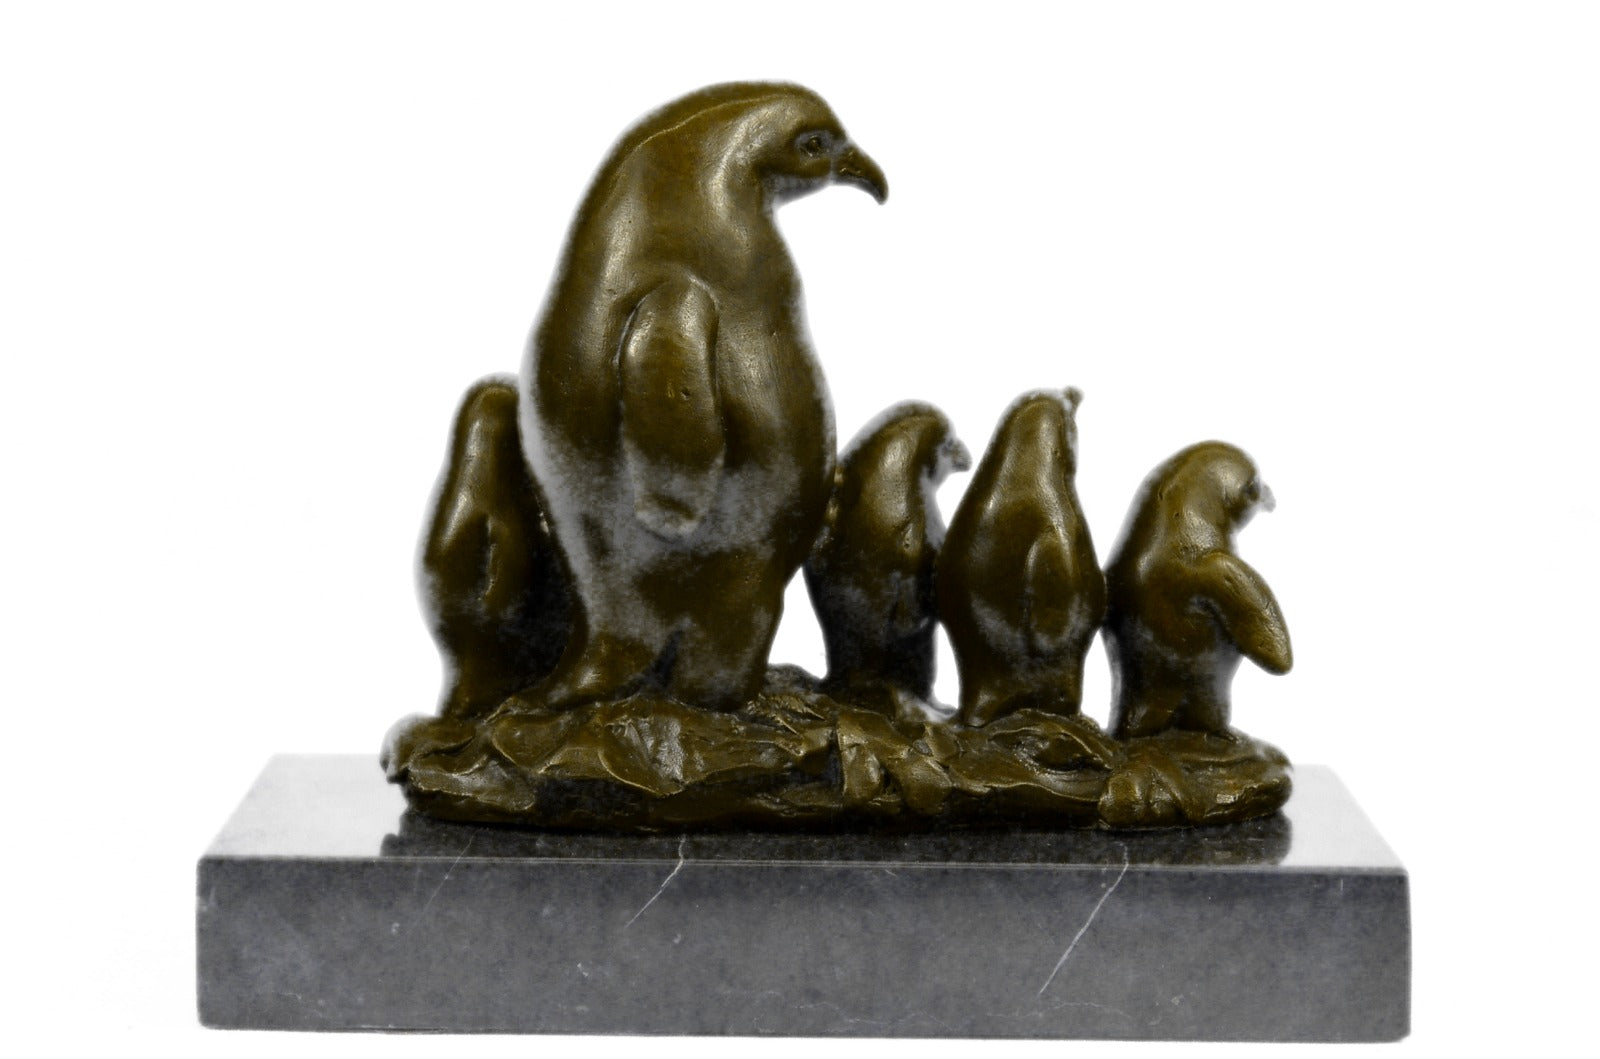 Handcrafted bronze sculpture SALE Marble Deco Art Chicks 4 With Penguin